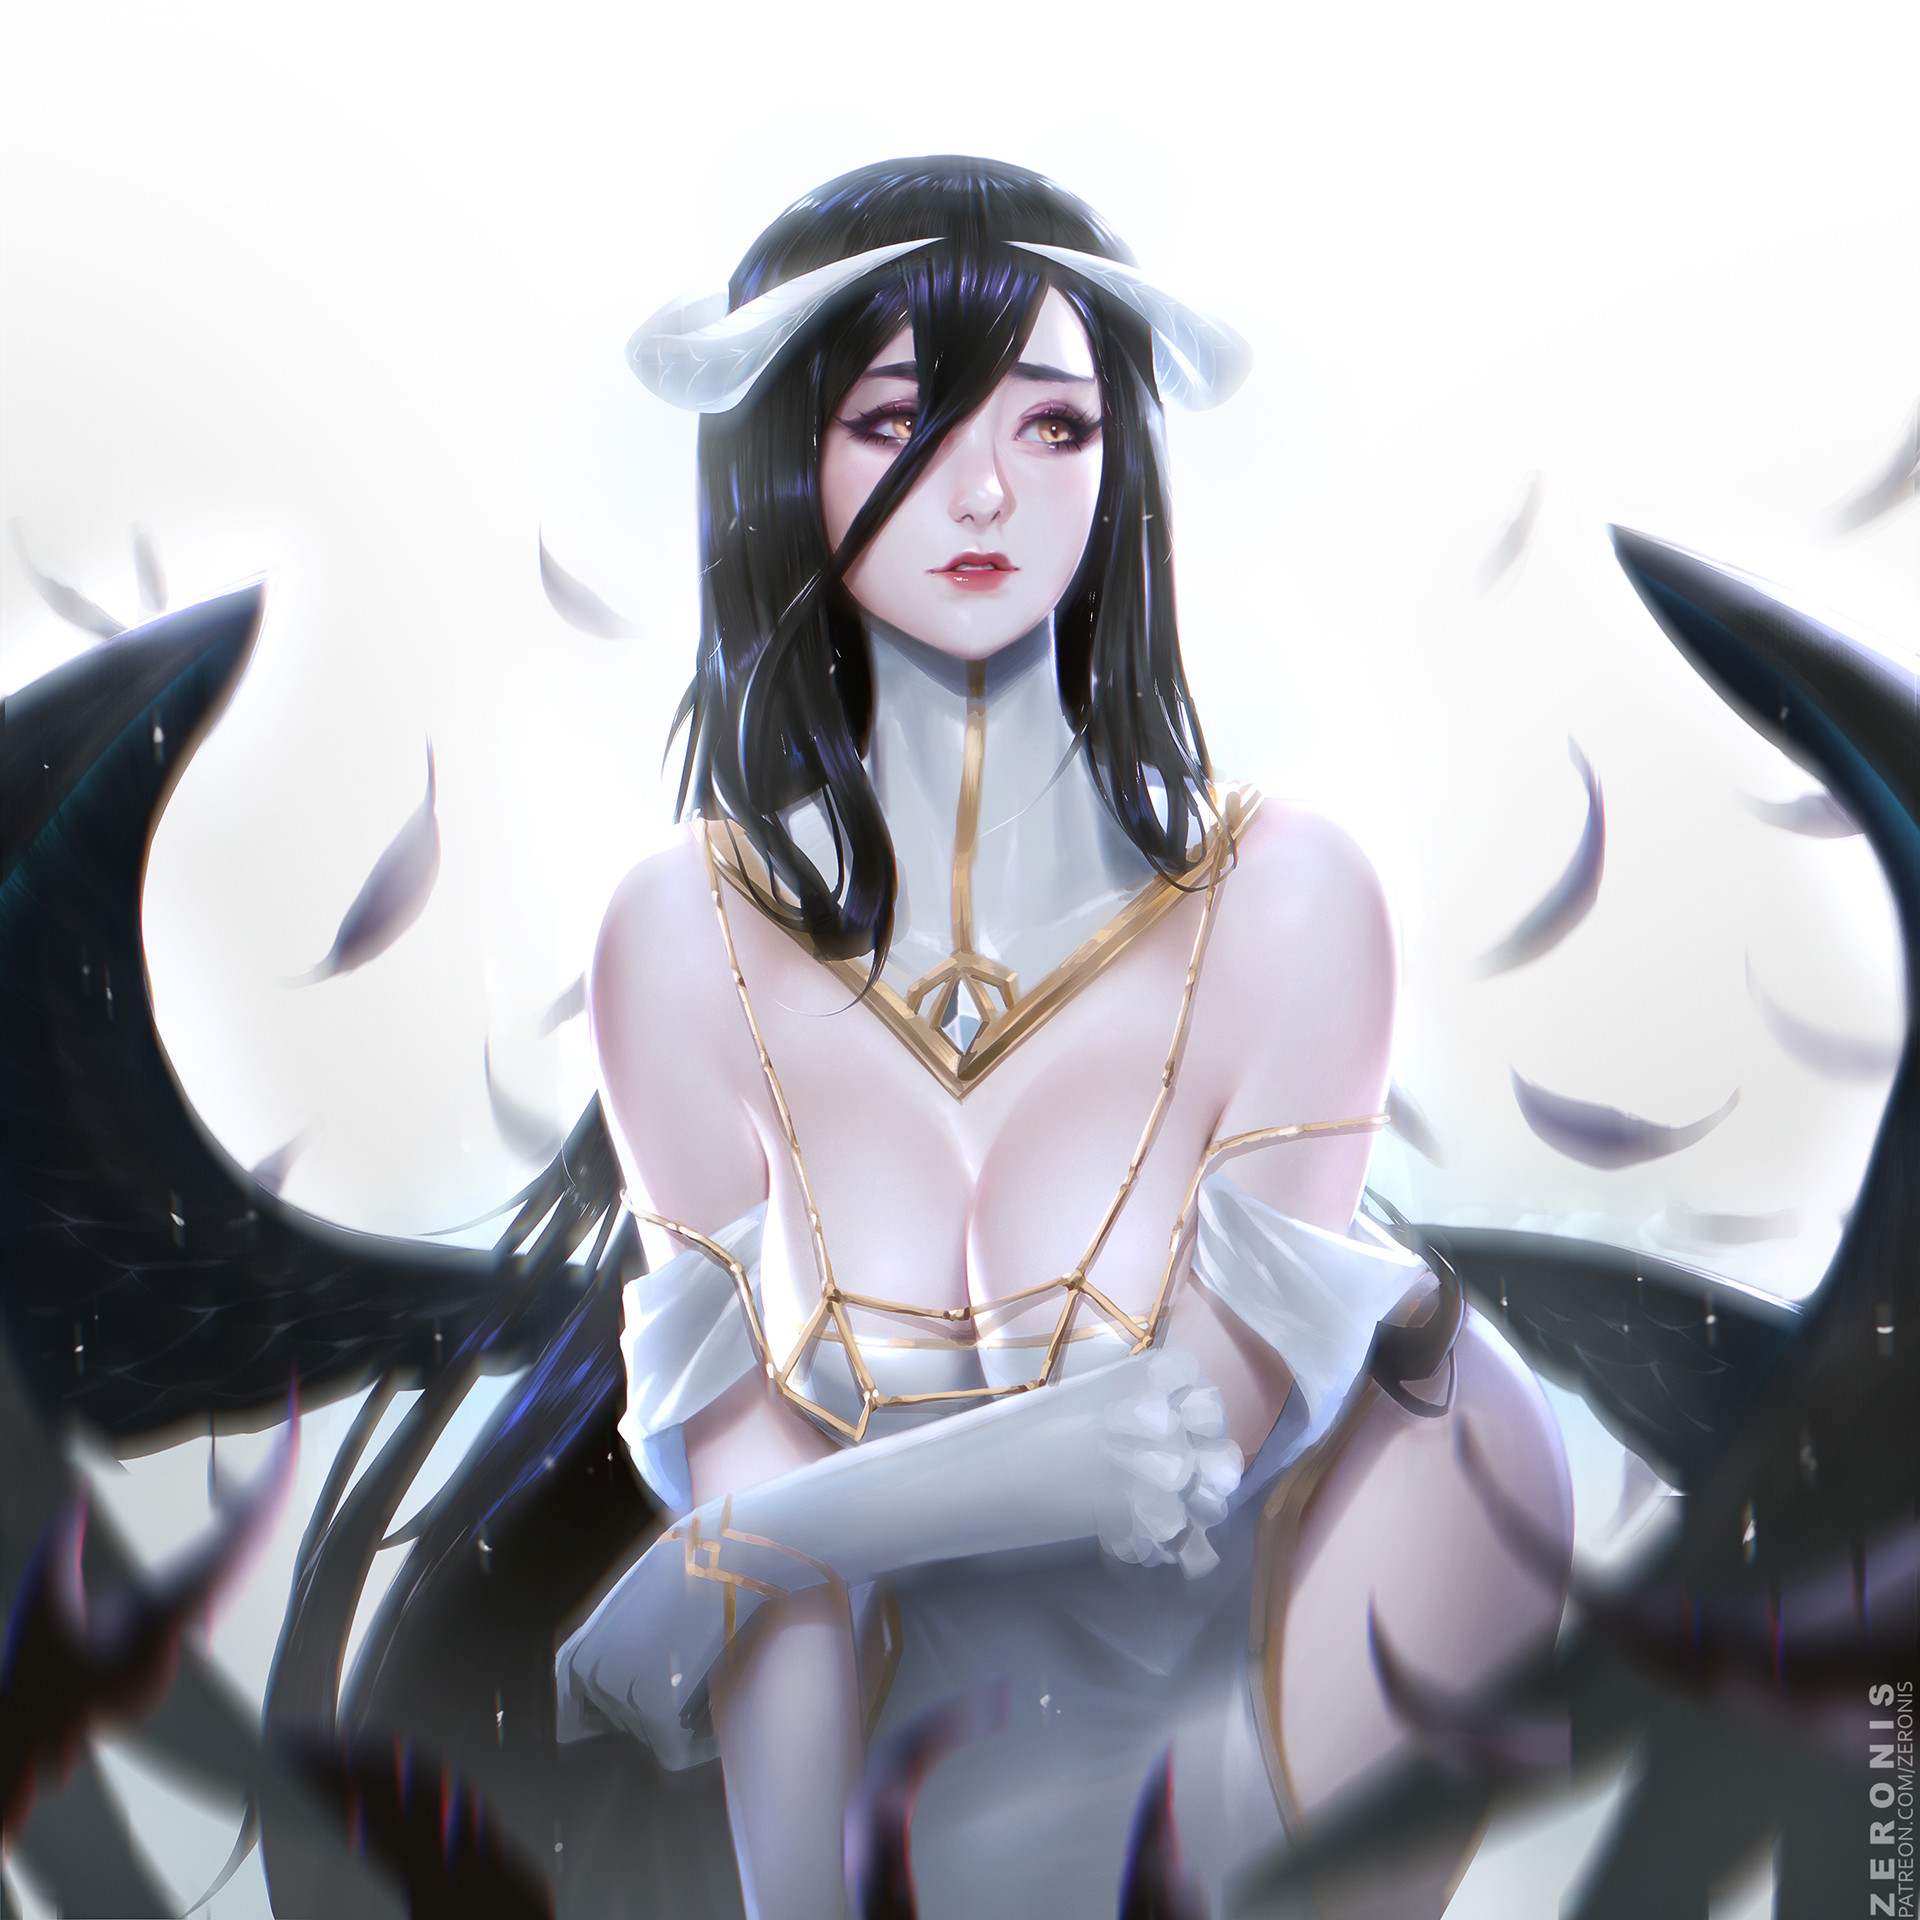 Anime 1920x1920 anime girls Albedo (OverLord) Zeronis horns big boobs black hair succubus cleavage wings Overlord (anime)